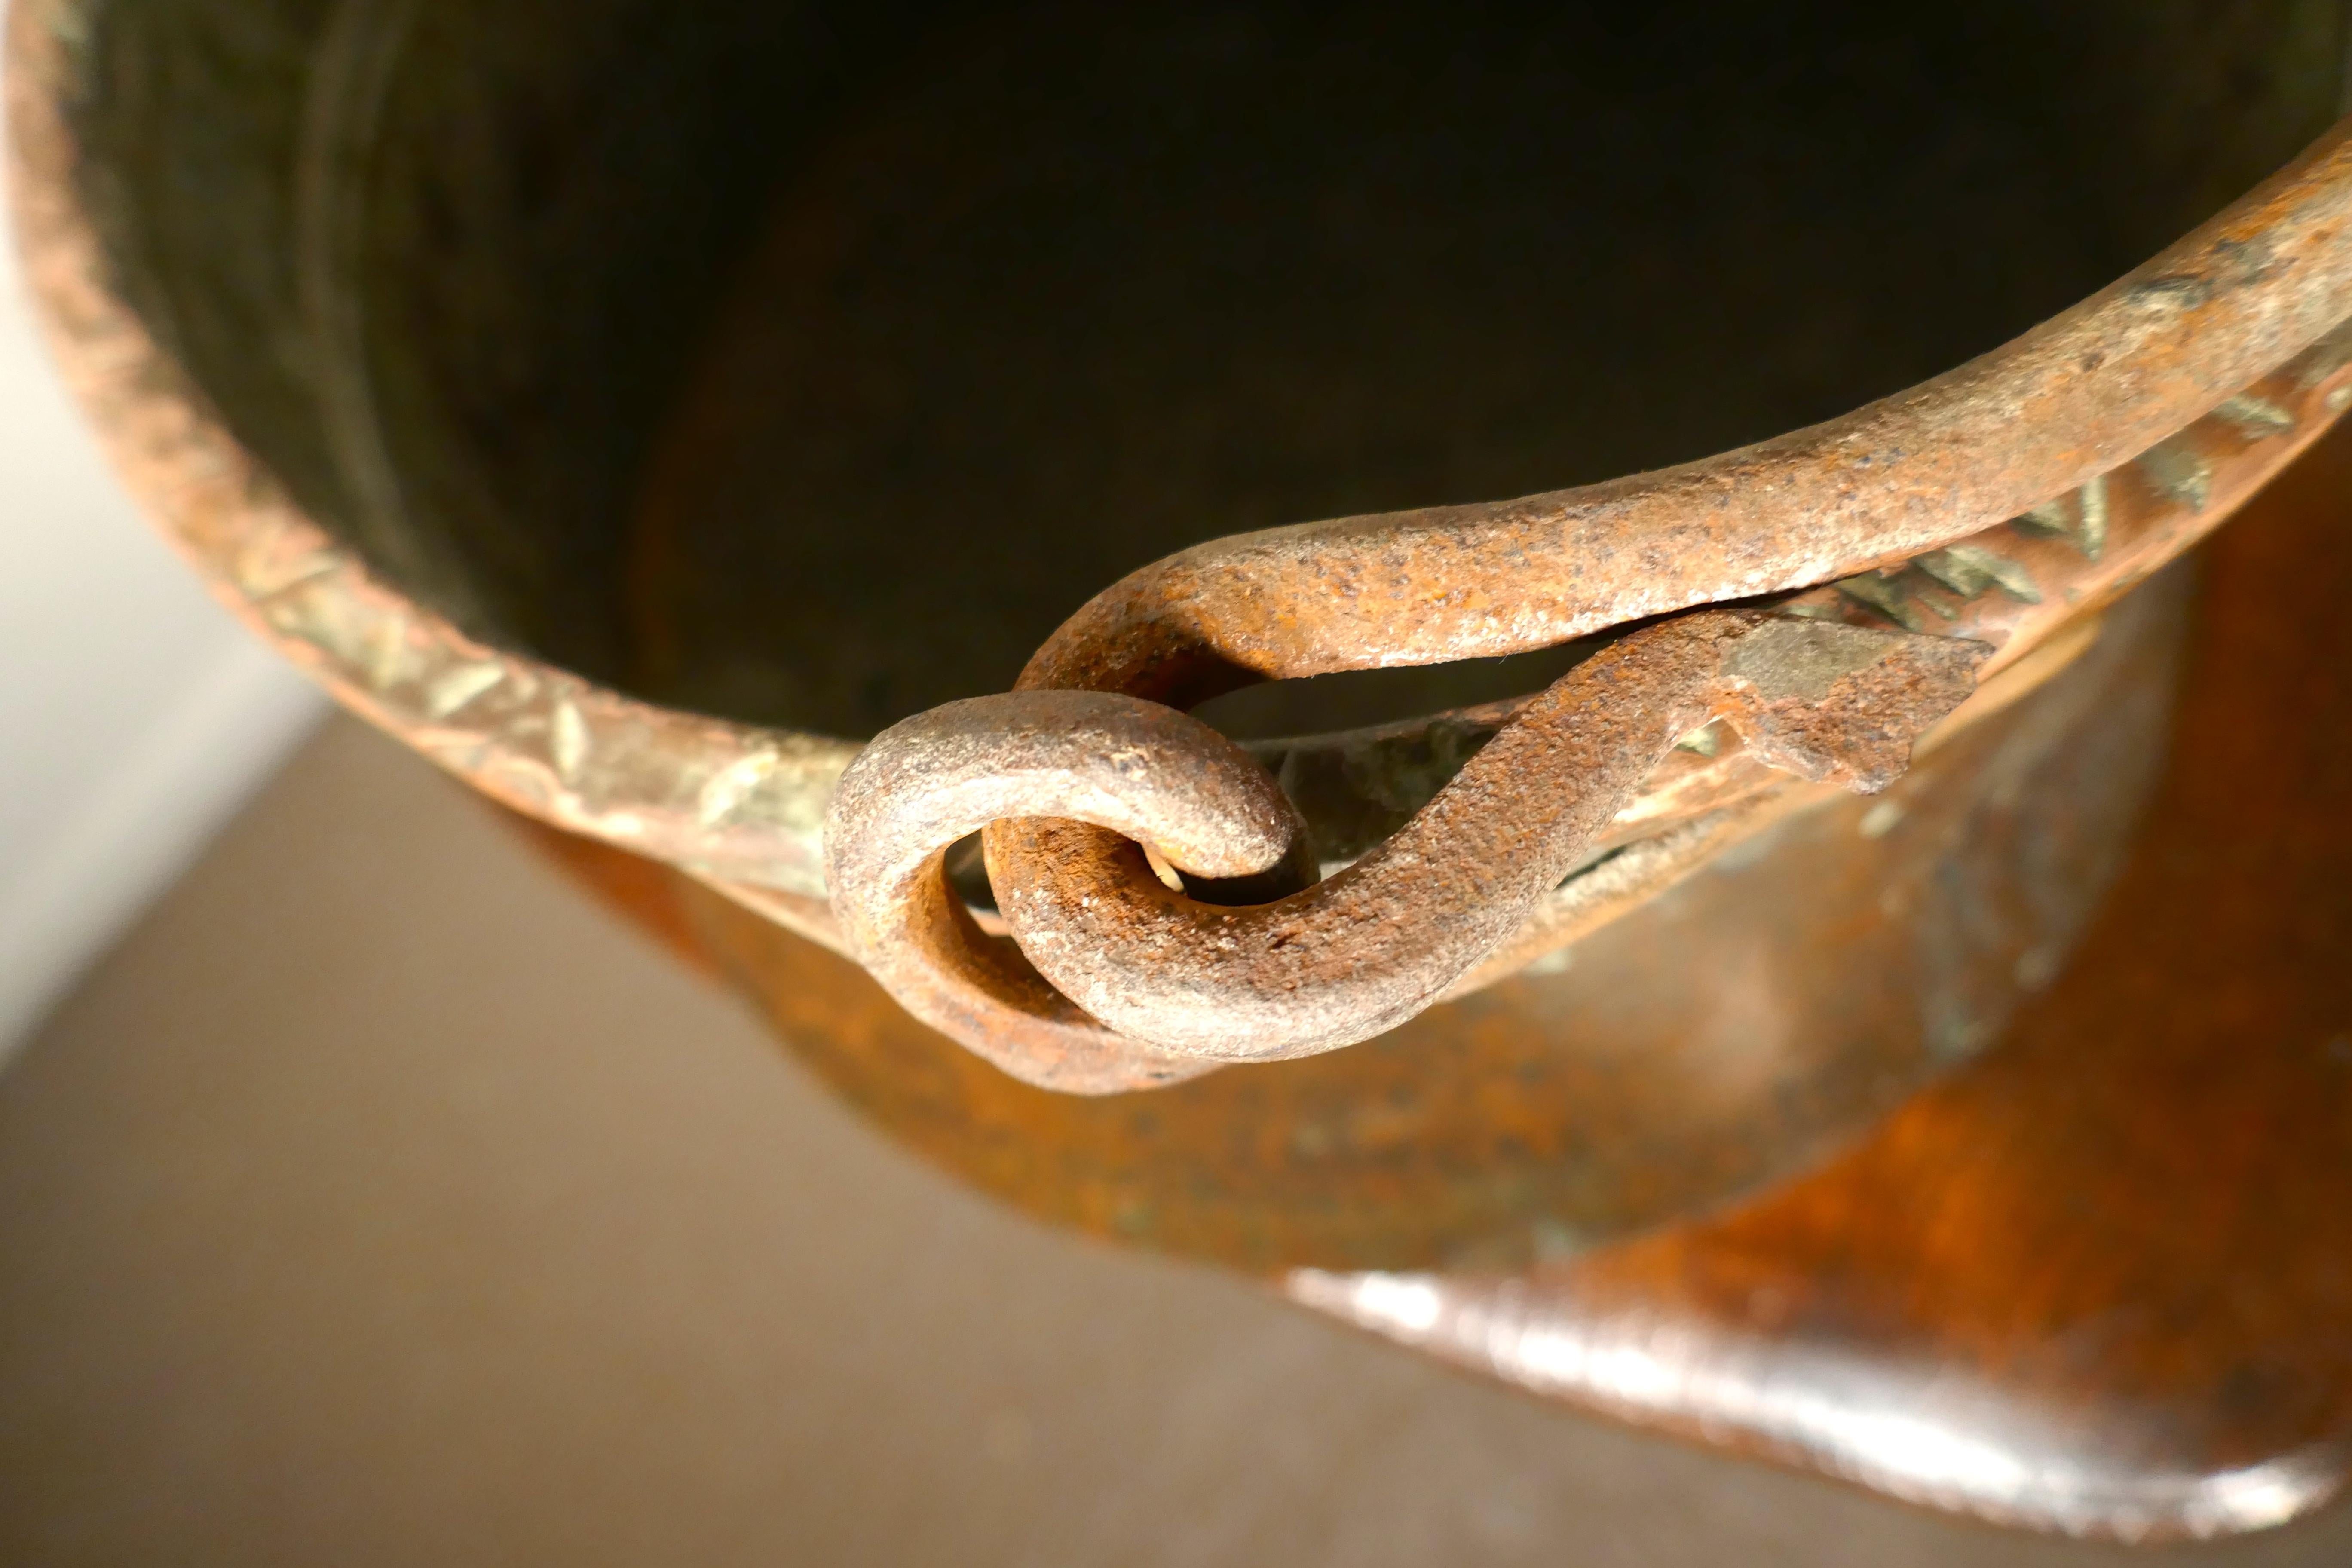 Early 19th century beaten copper cooking pot, cauldron

This is a lovely early cooking pot, it is made in beaten copper, slightly flaring out at the bottom, to catch the maximum heat from the fire
The pot has a decorated rolled top and the Iron